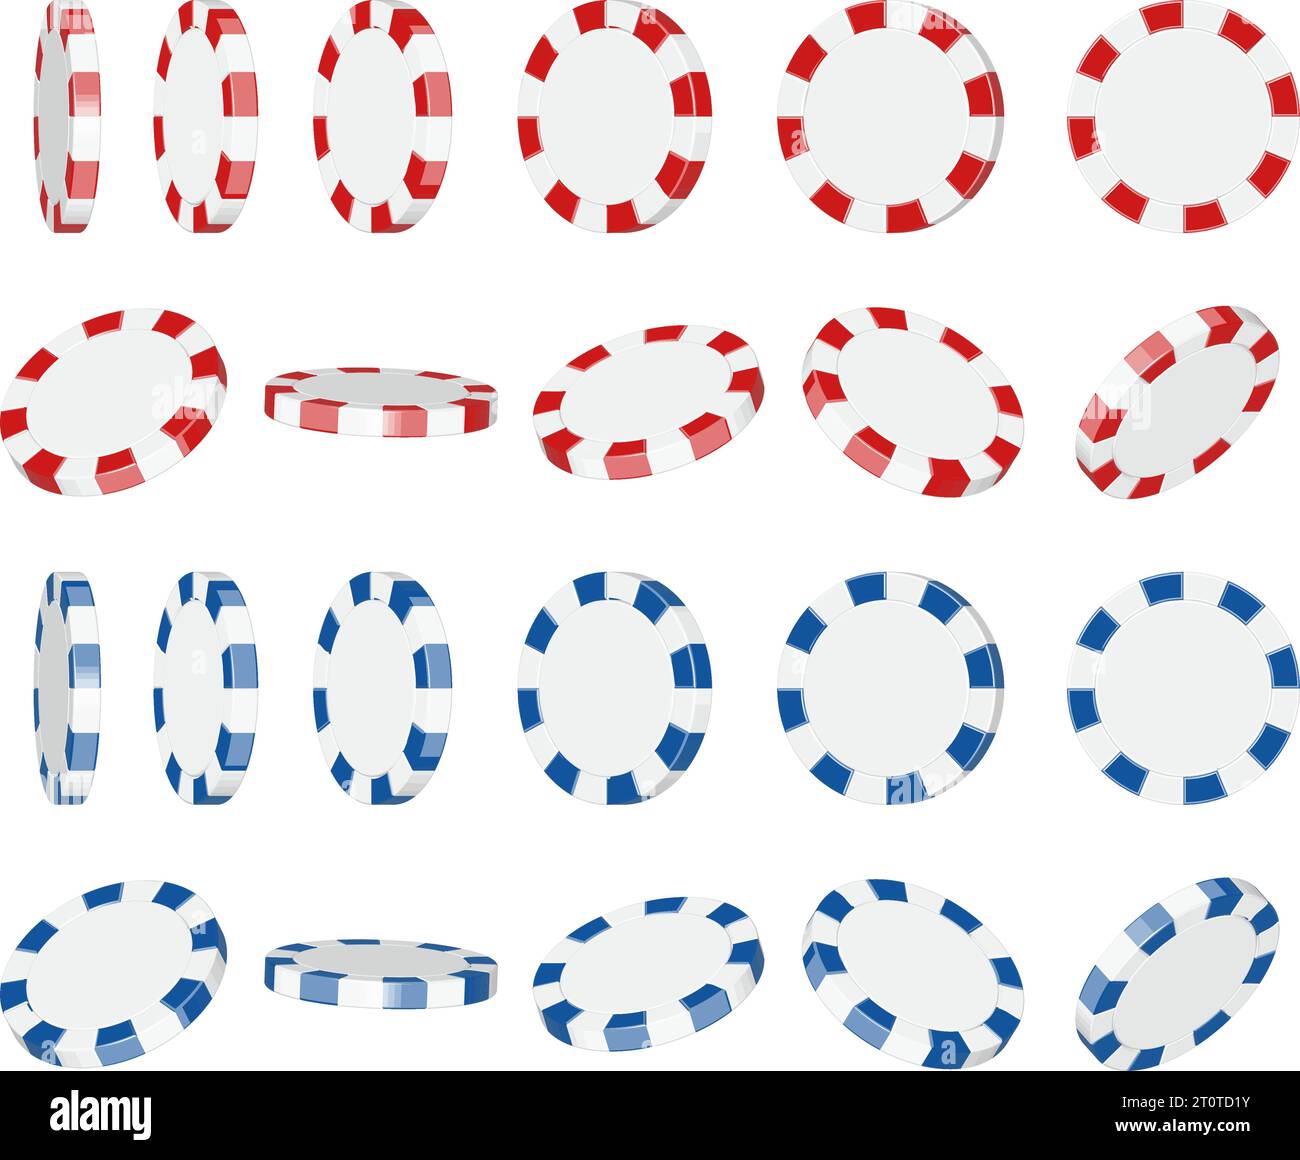 Illustration of poker chips from various angles (casino chips) Stock Vector